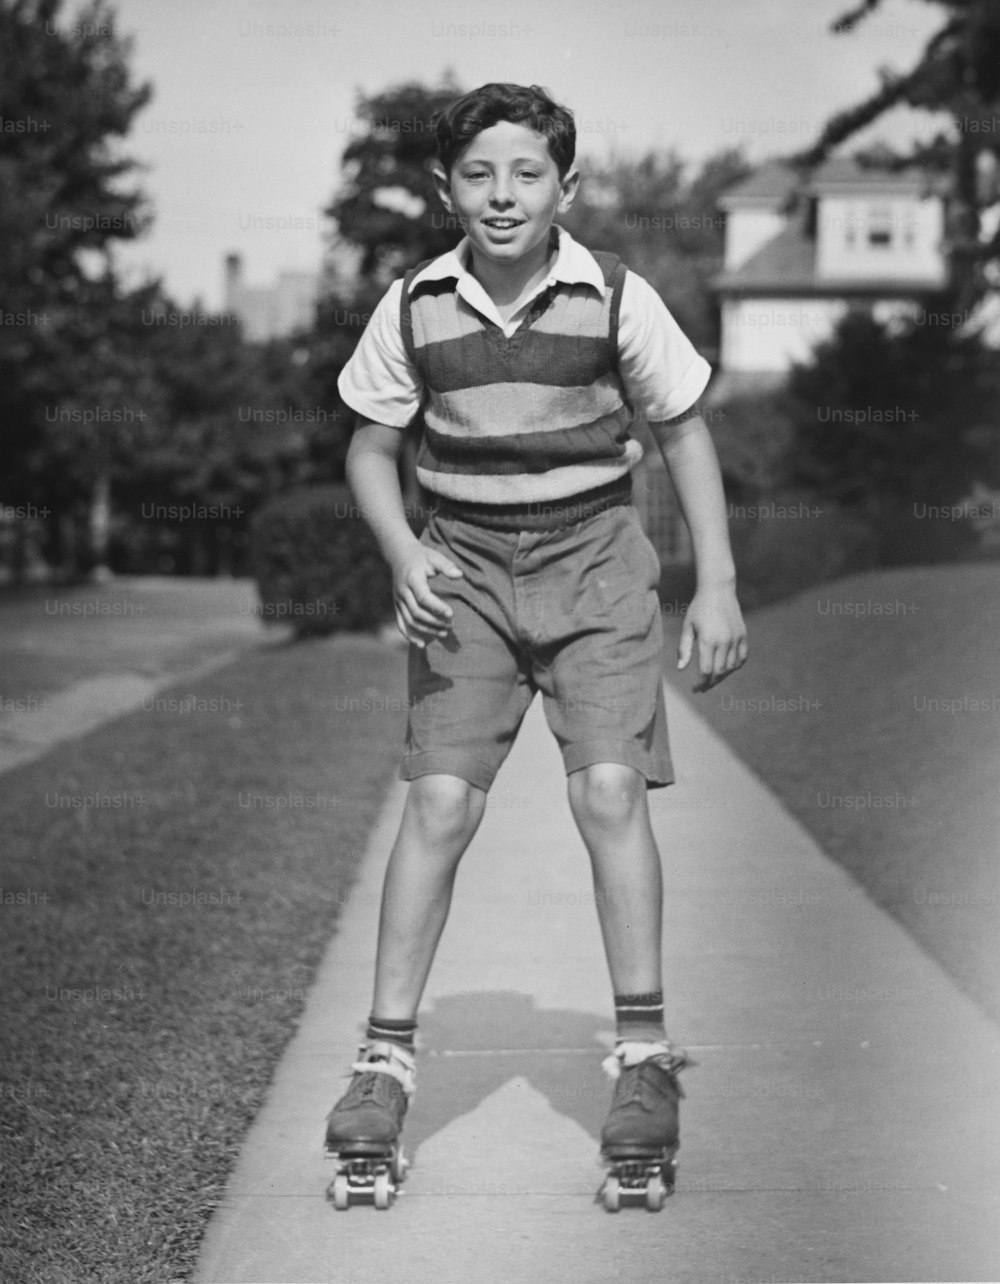 A boy roller skating down a path on a suburban street. (Photo by George Marks/Retrofile/Getty Images)